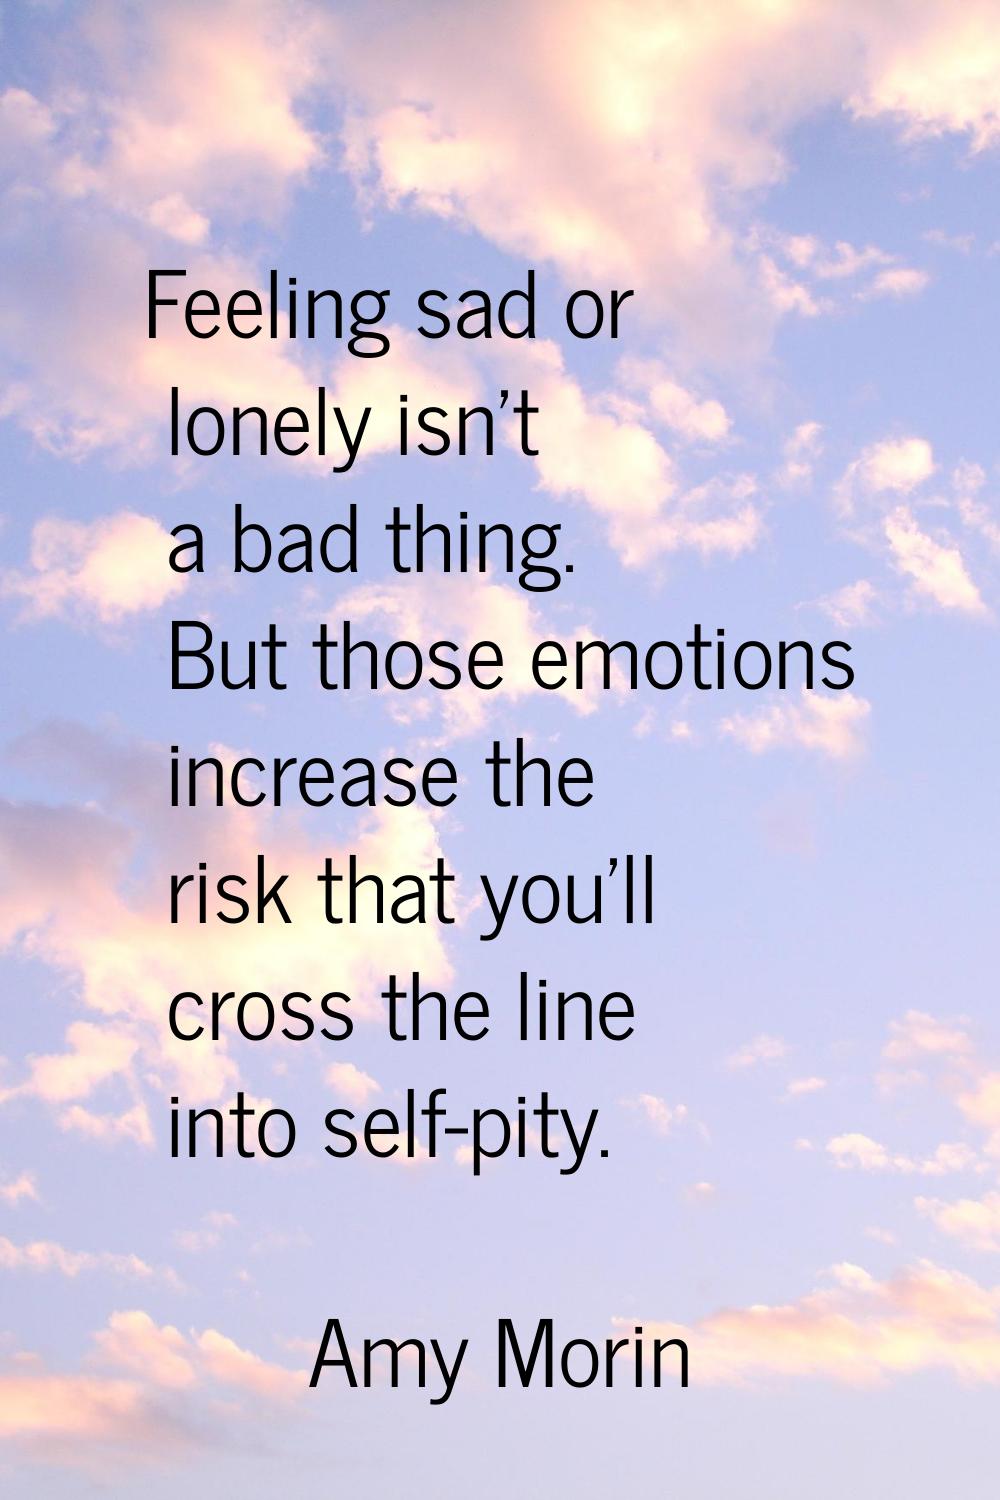 Feeling sad or lonely isn't a bad thing. But those emotions increase the risk that you'll cross the